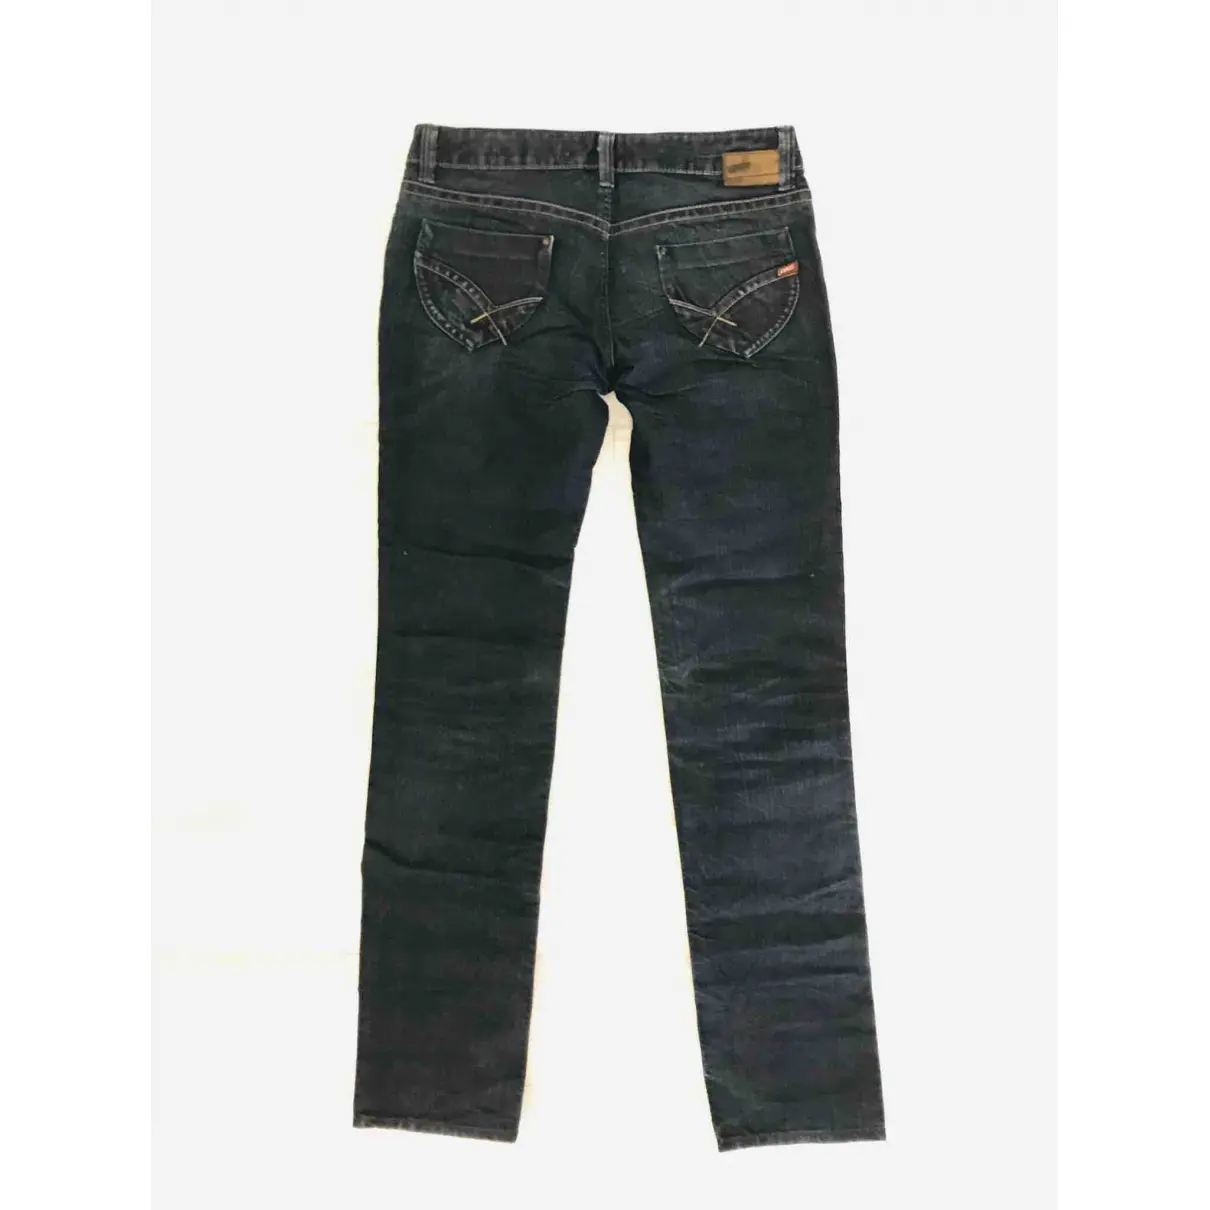 Buy Gas Straight jeans online